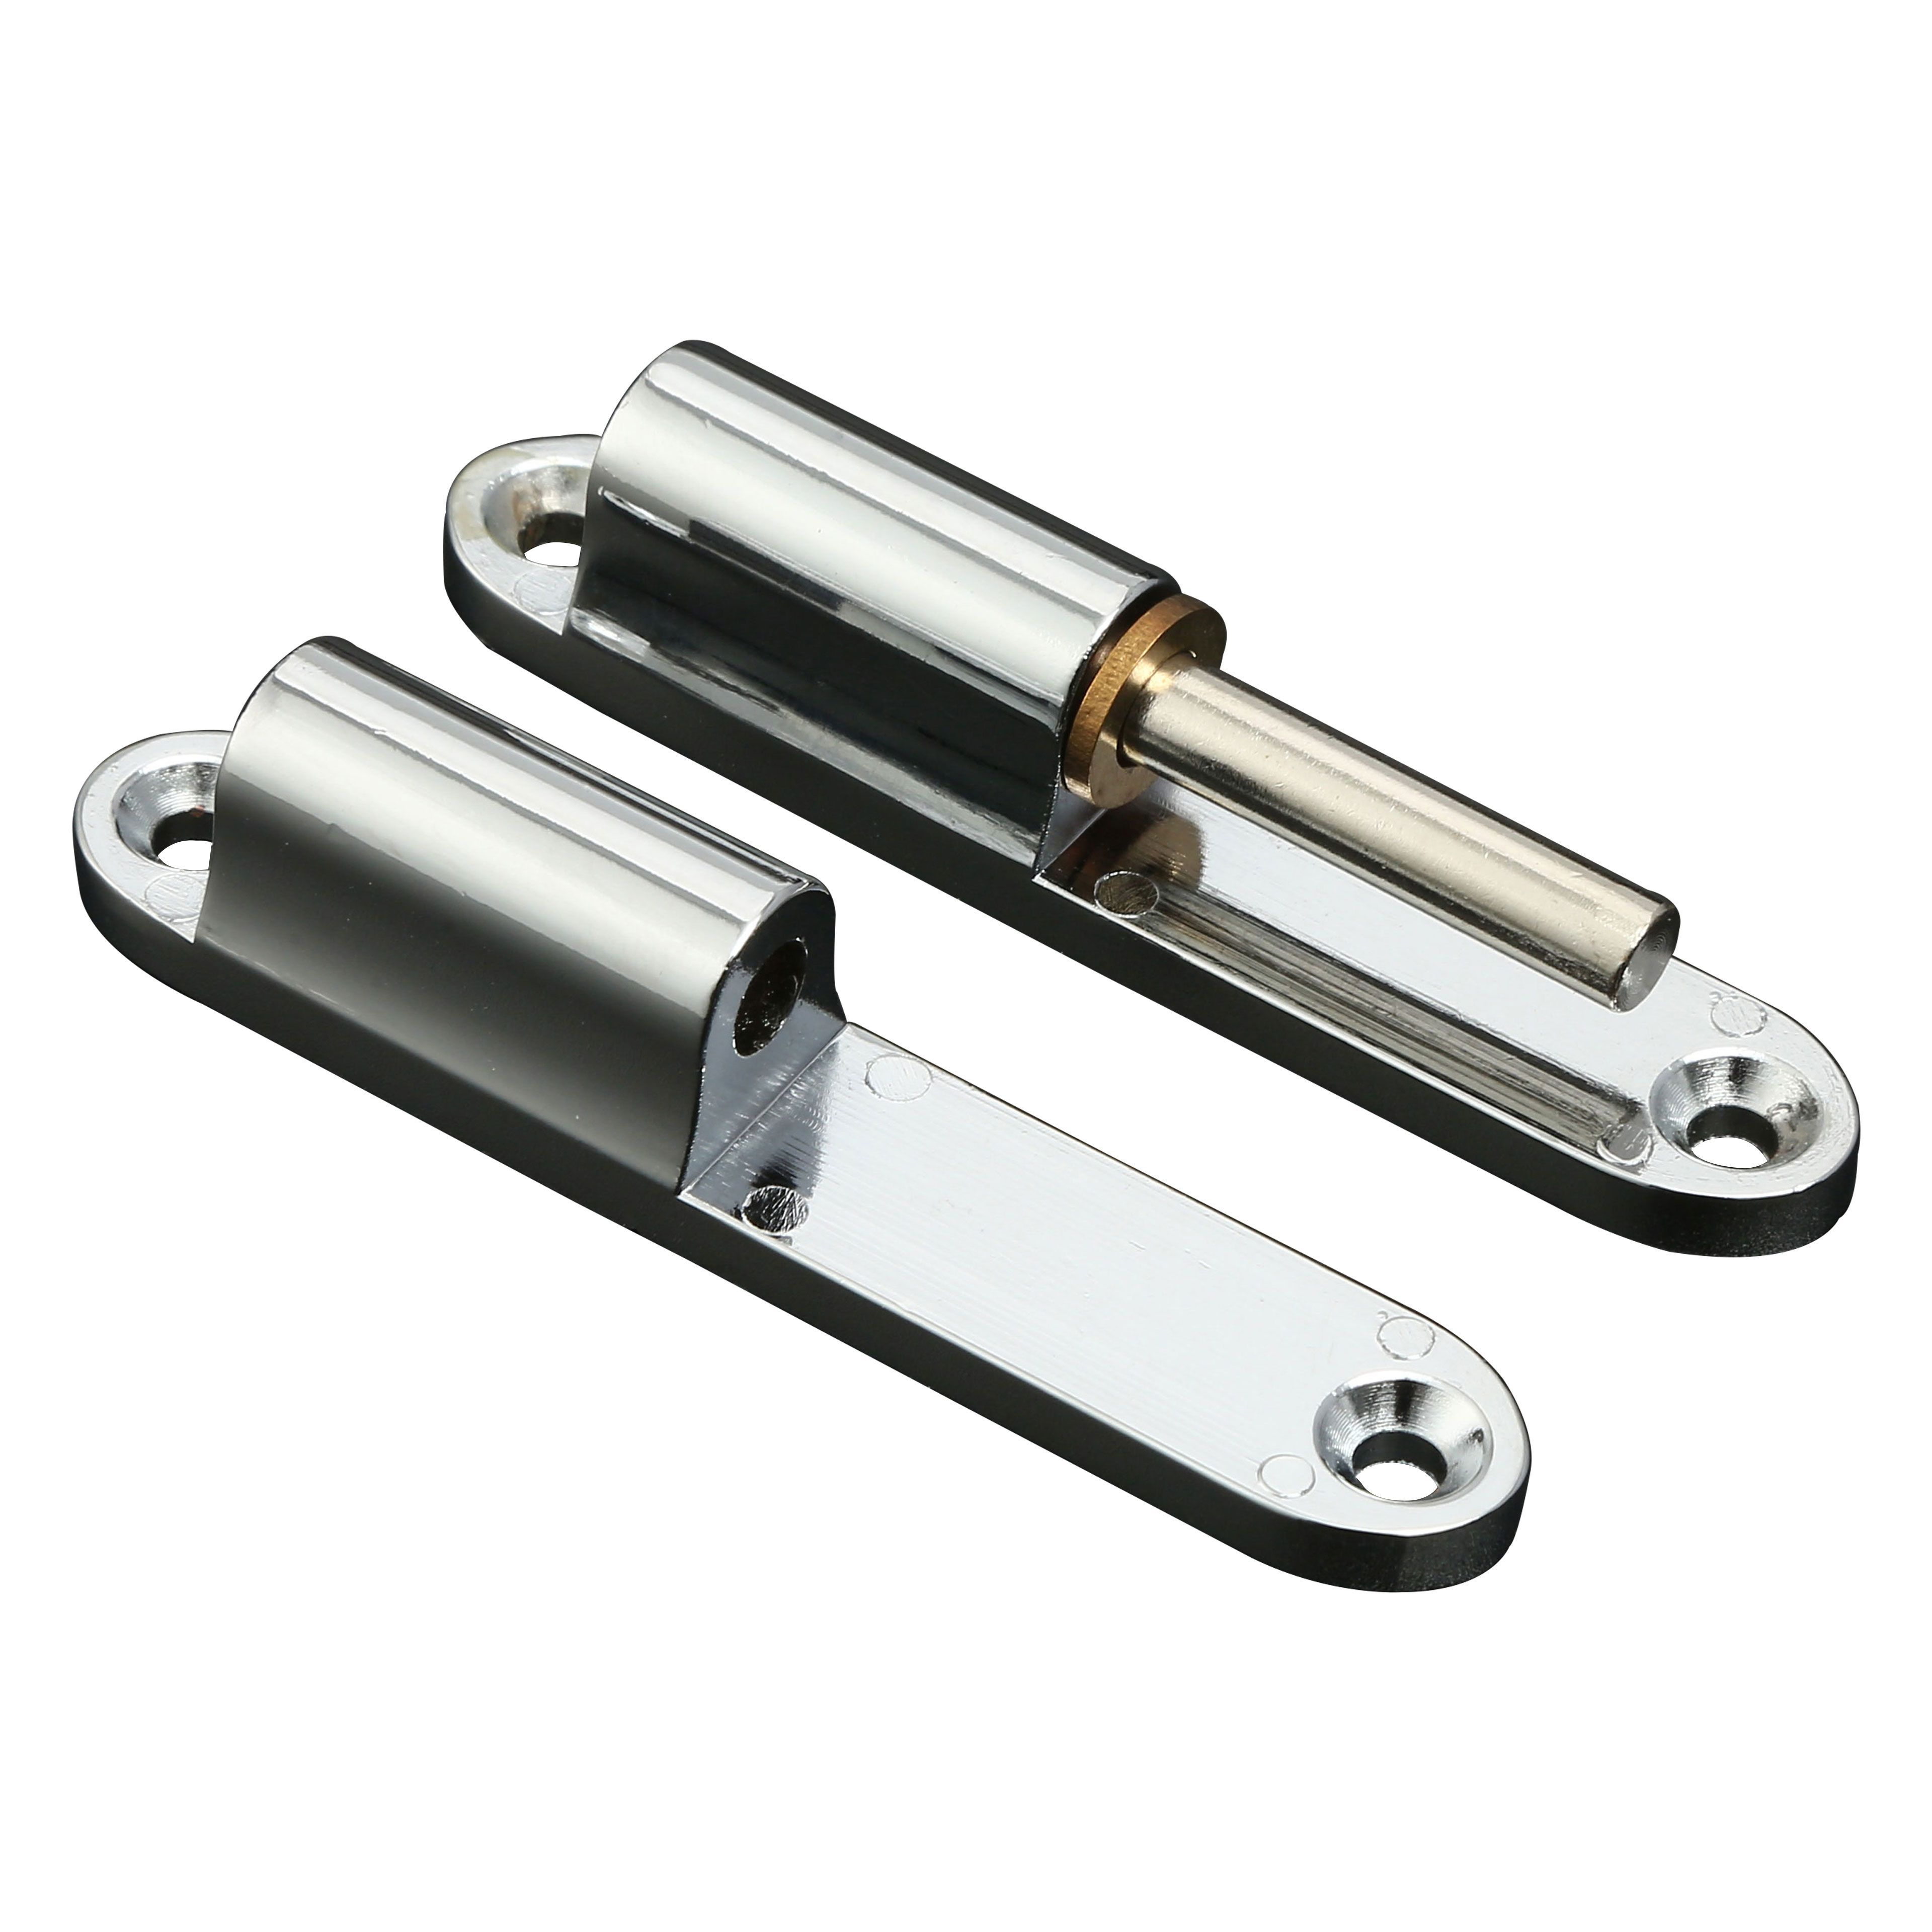 CL231 cabinet hinges zinc alloy with high quality manufacture furniture hinge